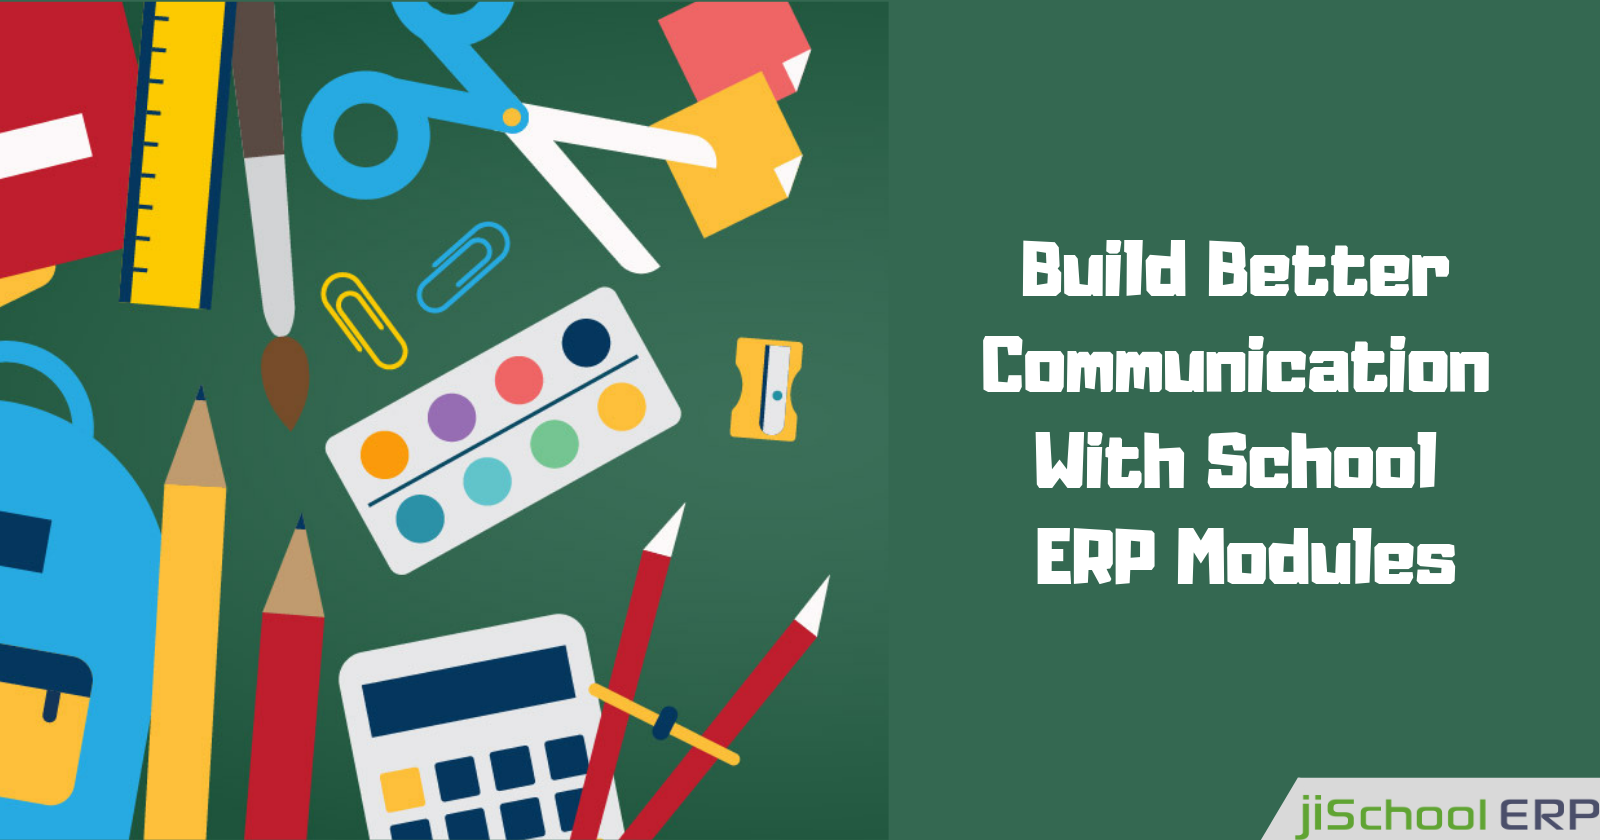 Interact Smartly With School ERP Modules